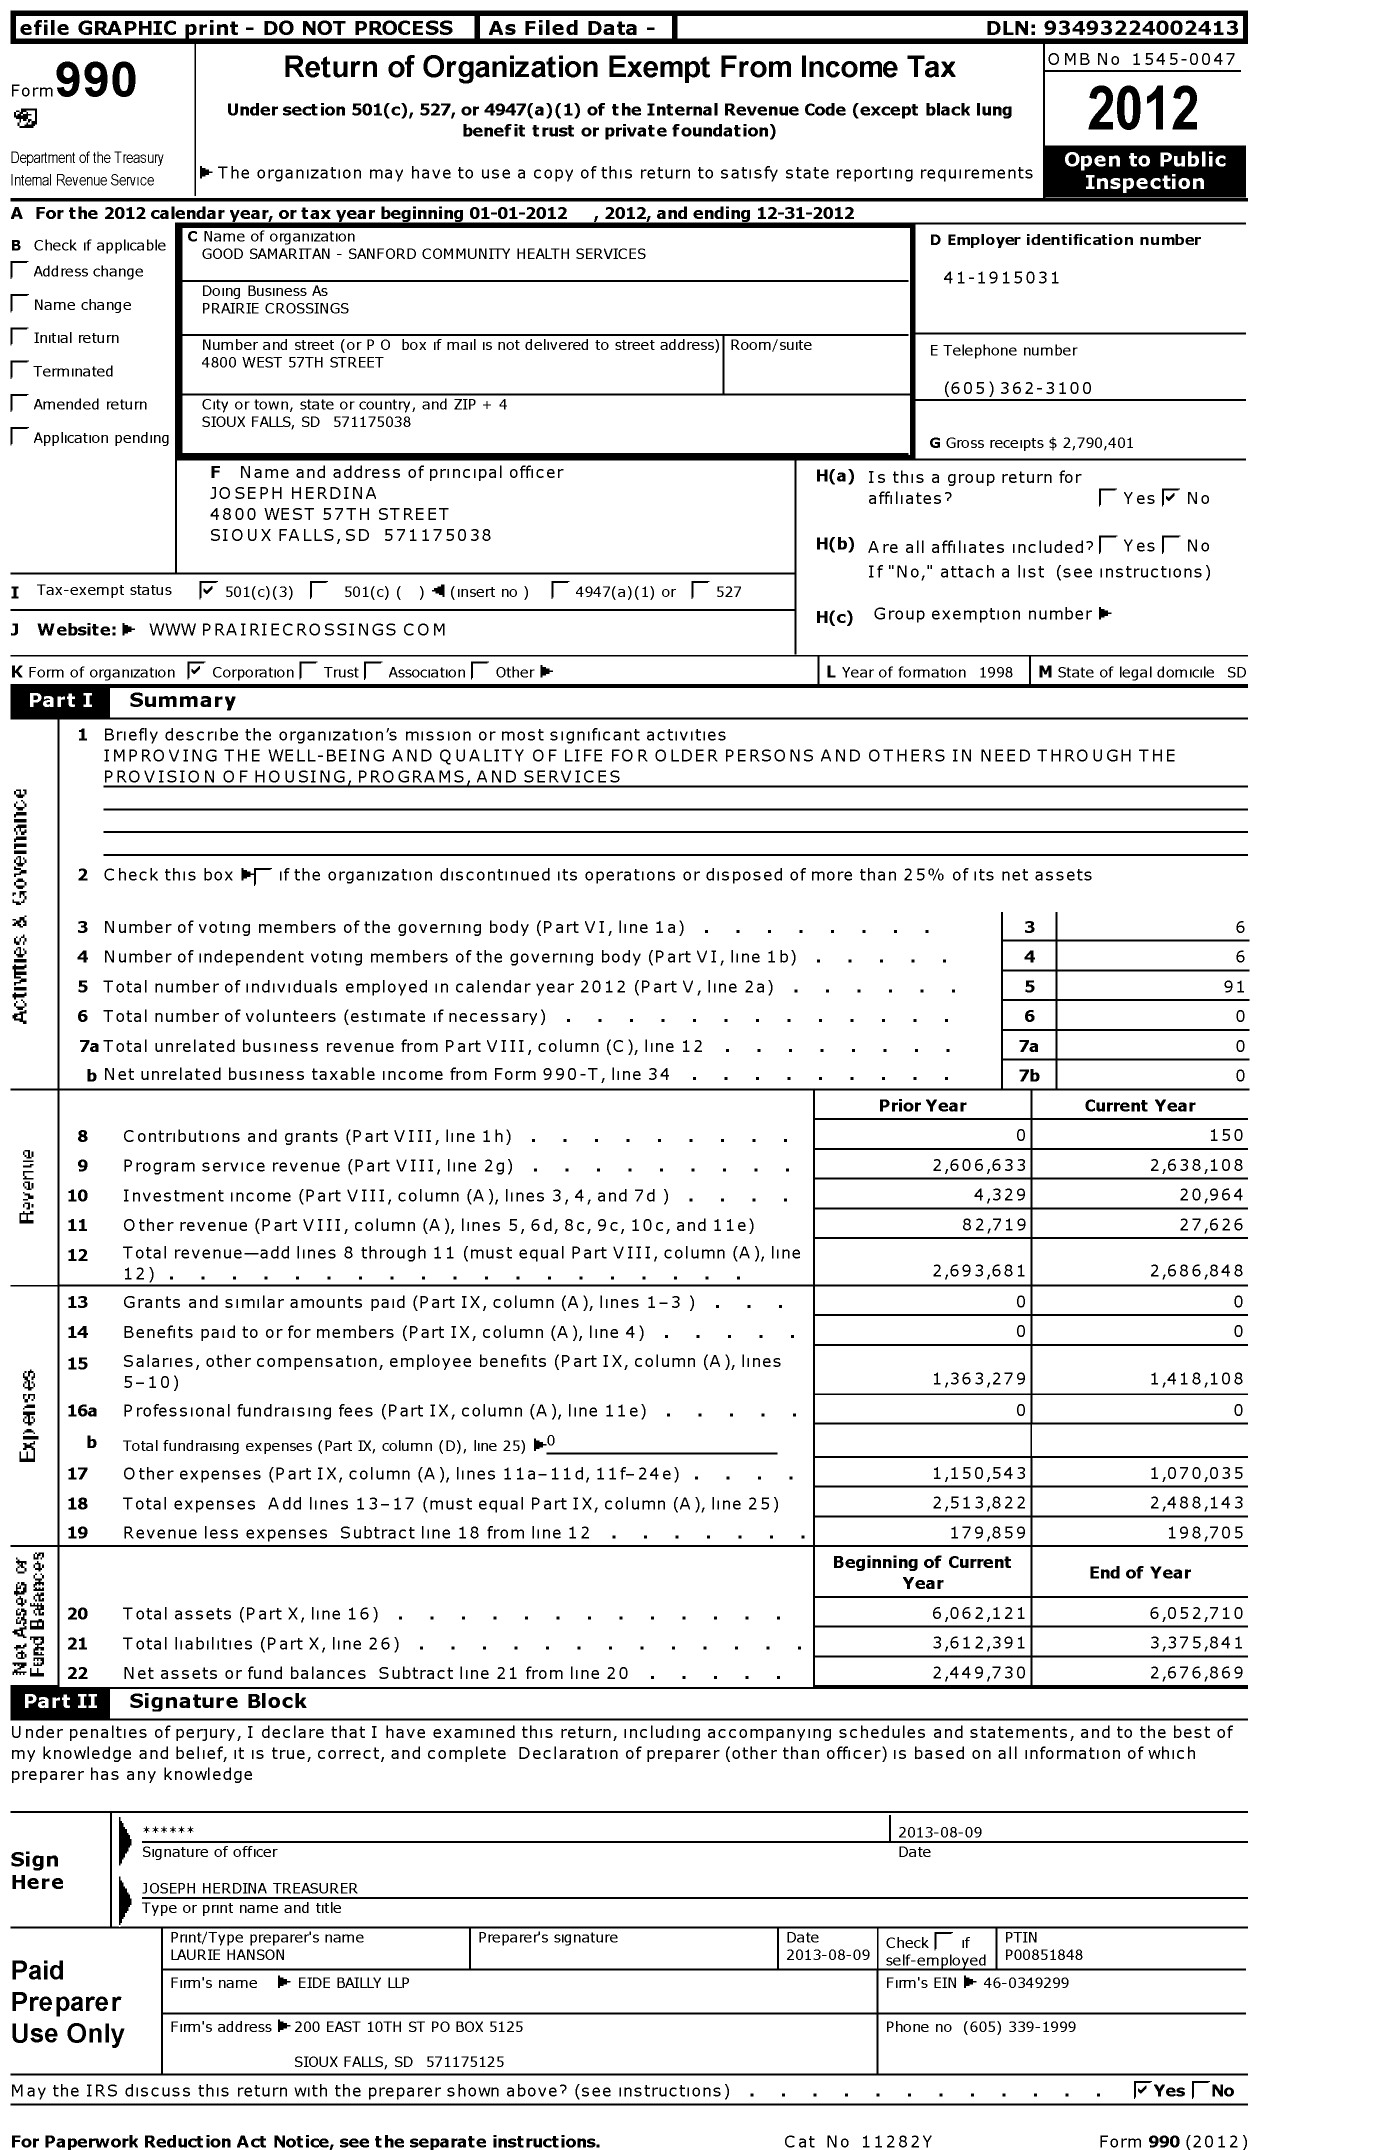 Image of first page of 2012 Form 990 for Good Samaritan - Sanford Community Health Services